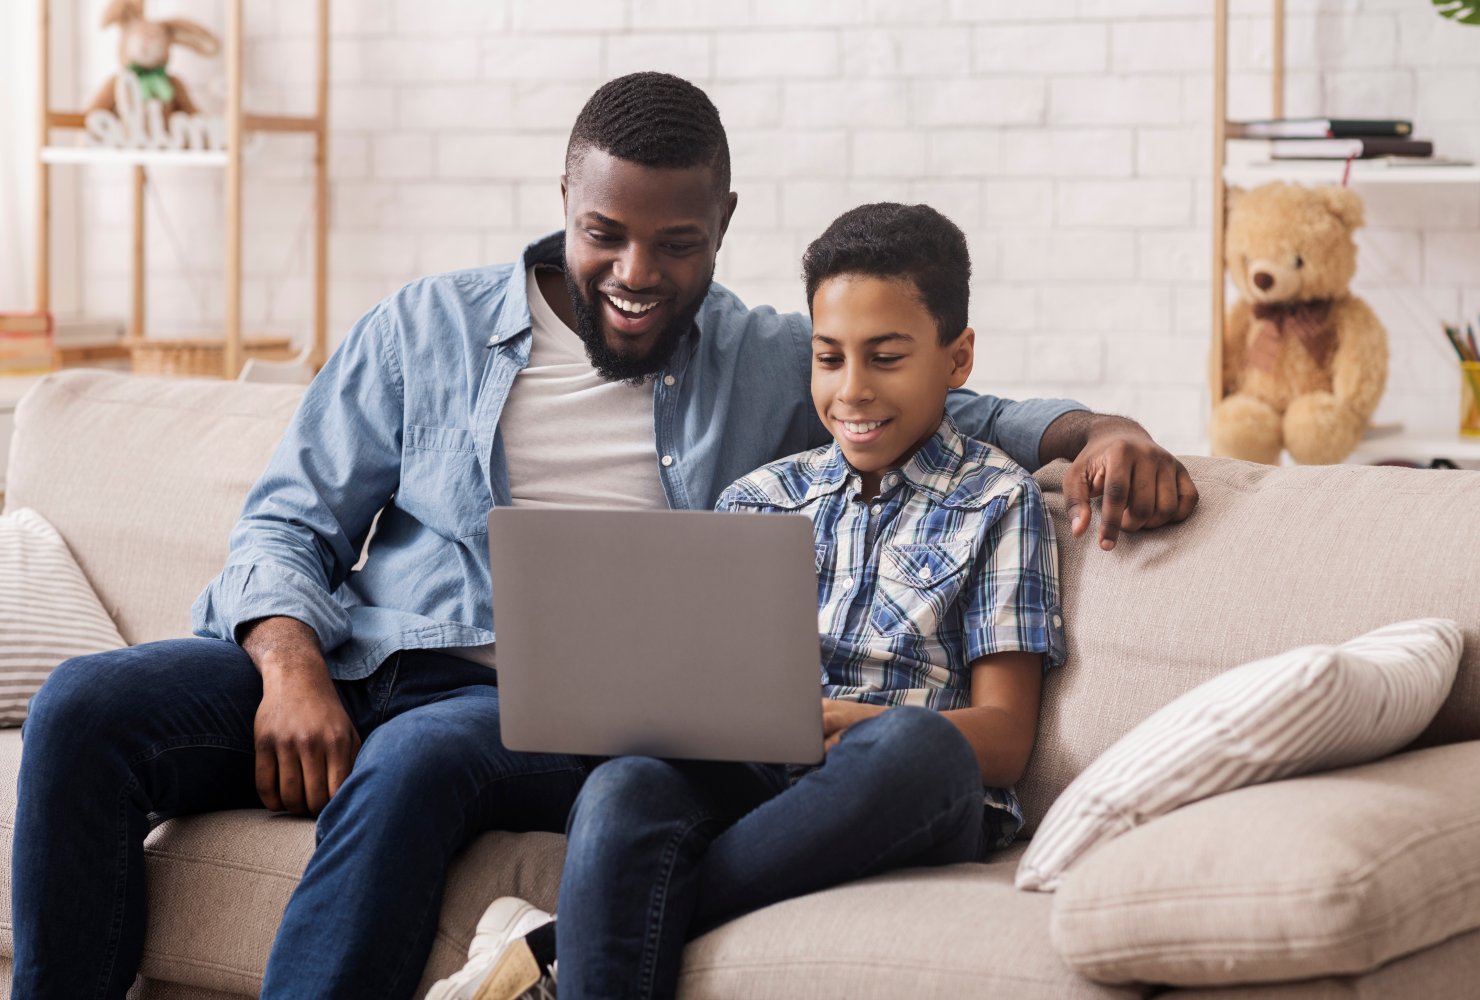 Young boy and Dad sitting on couch smiling at laptop